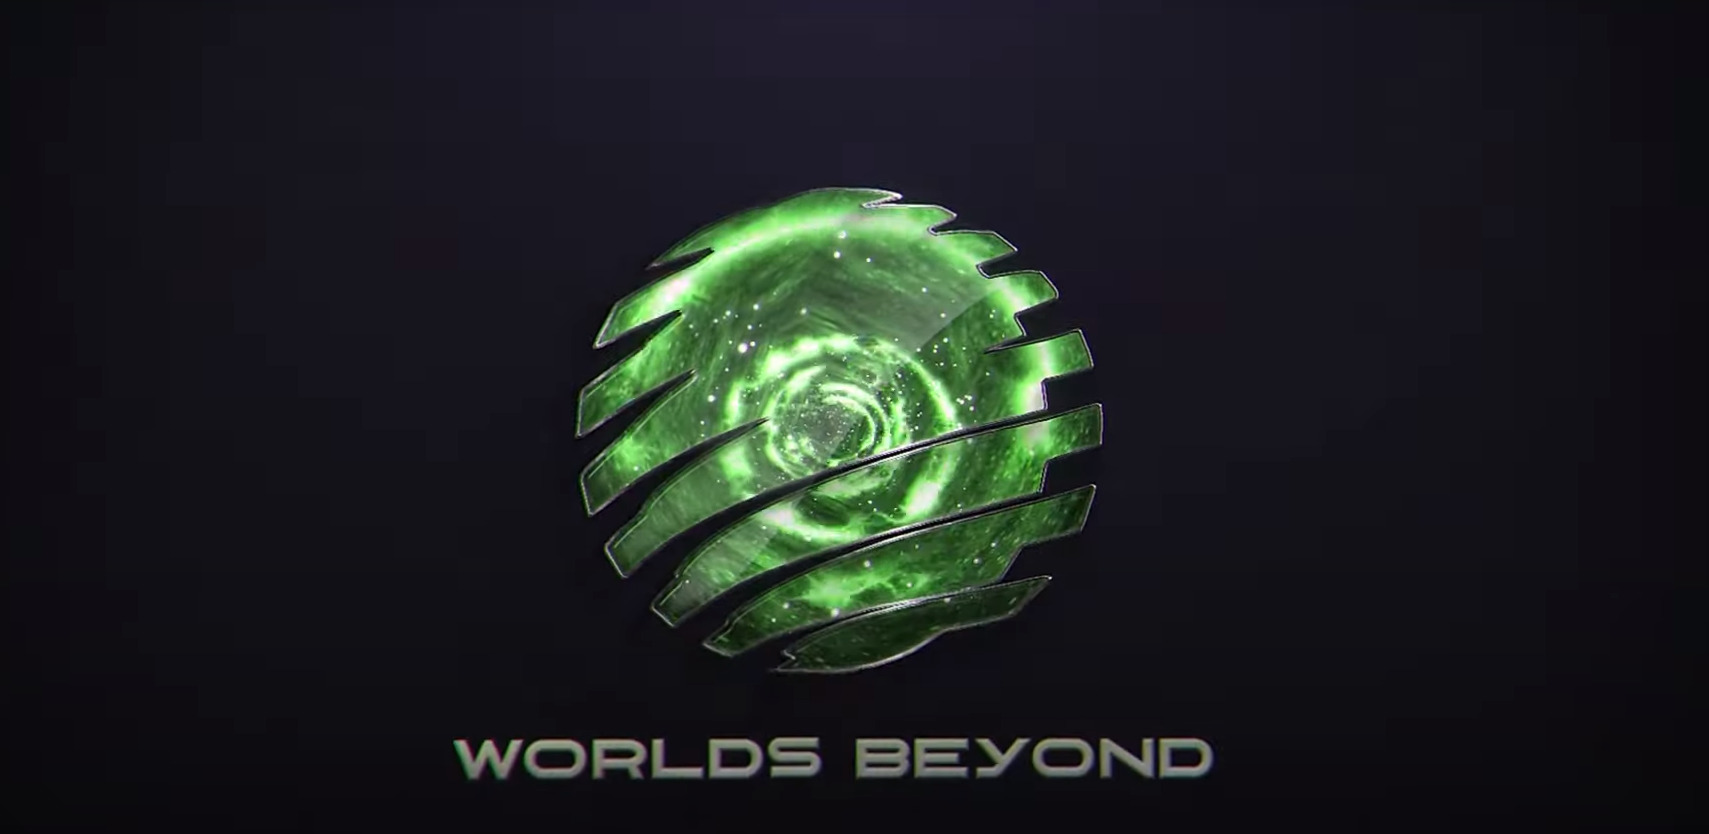 A First Look at Worlds Beyond